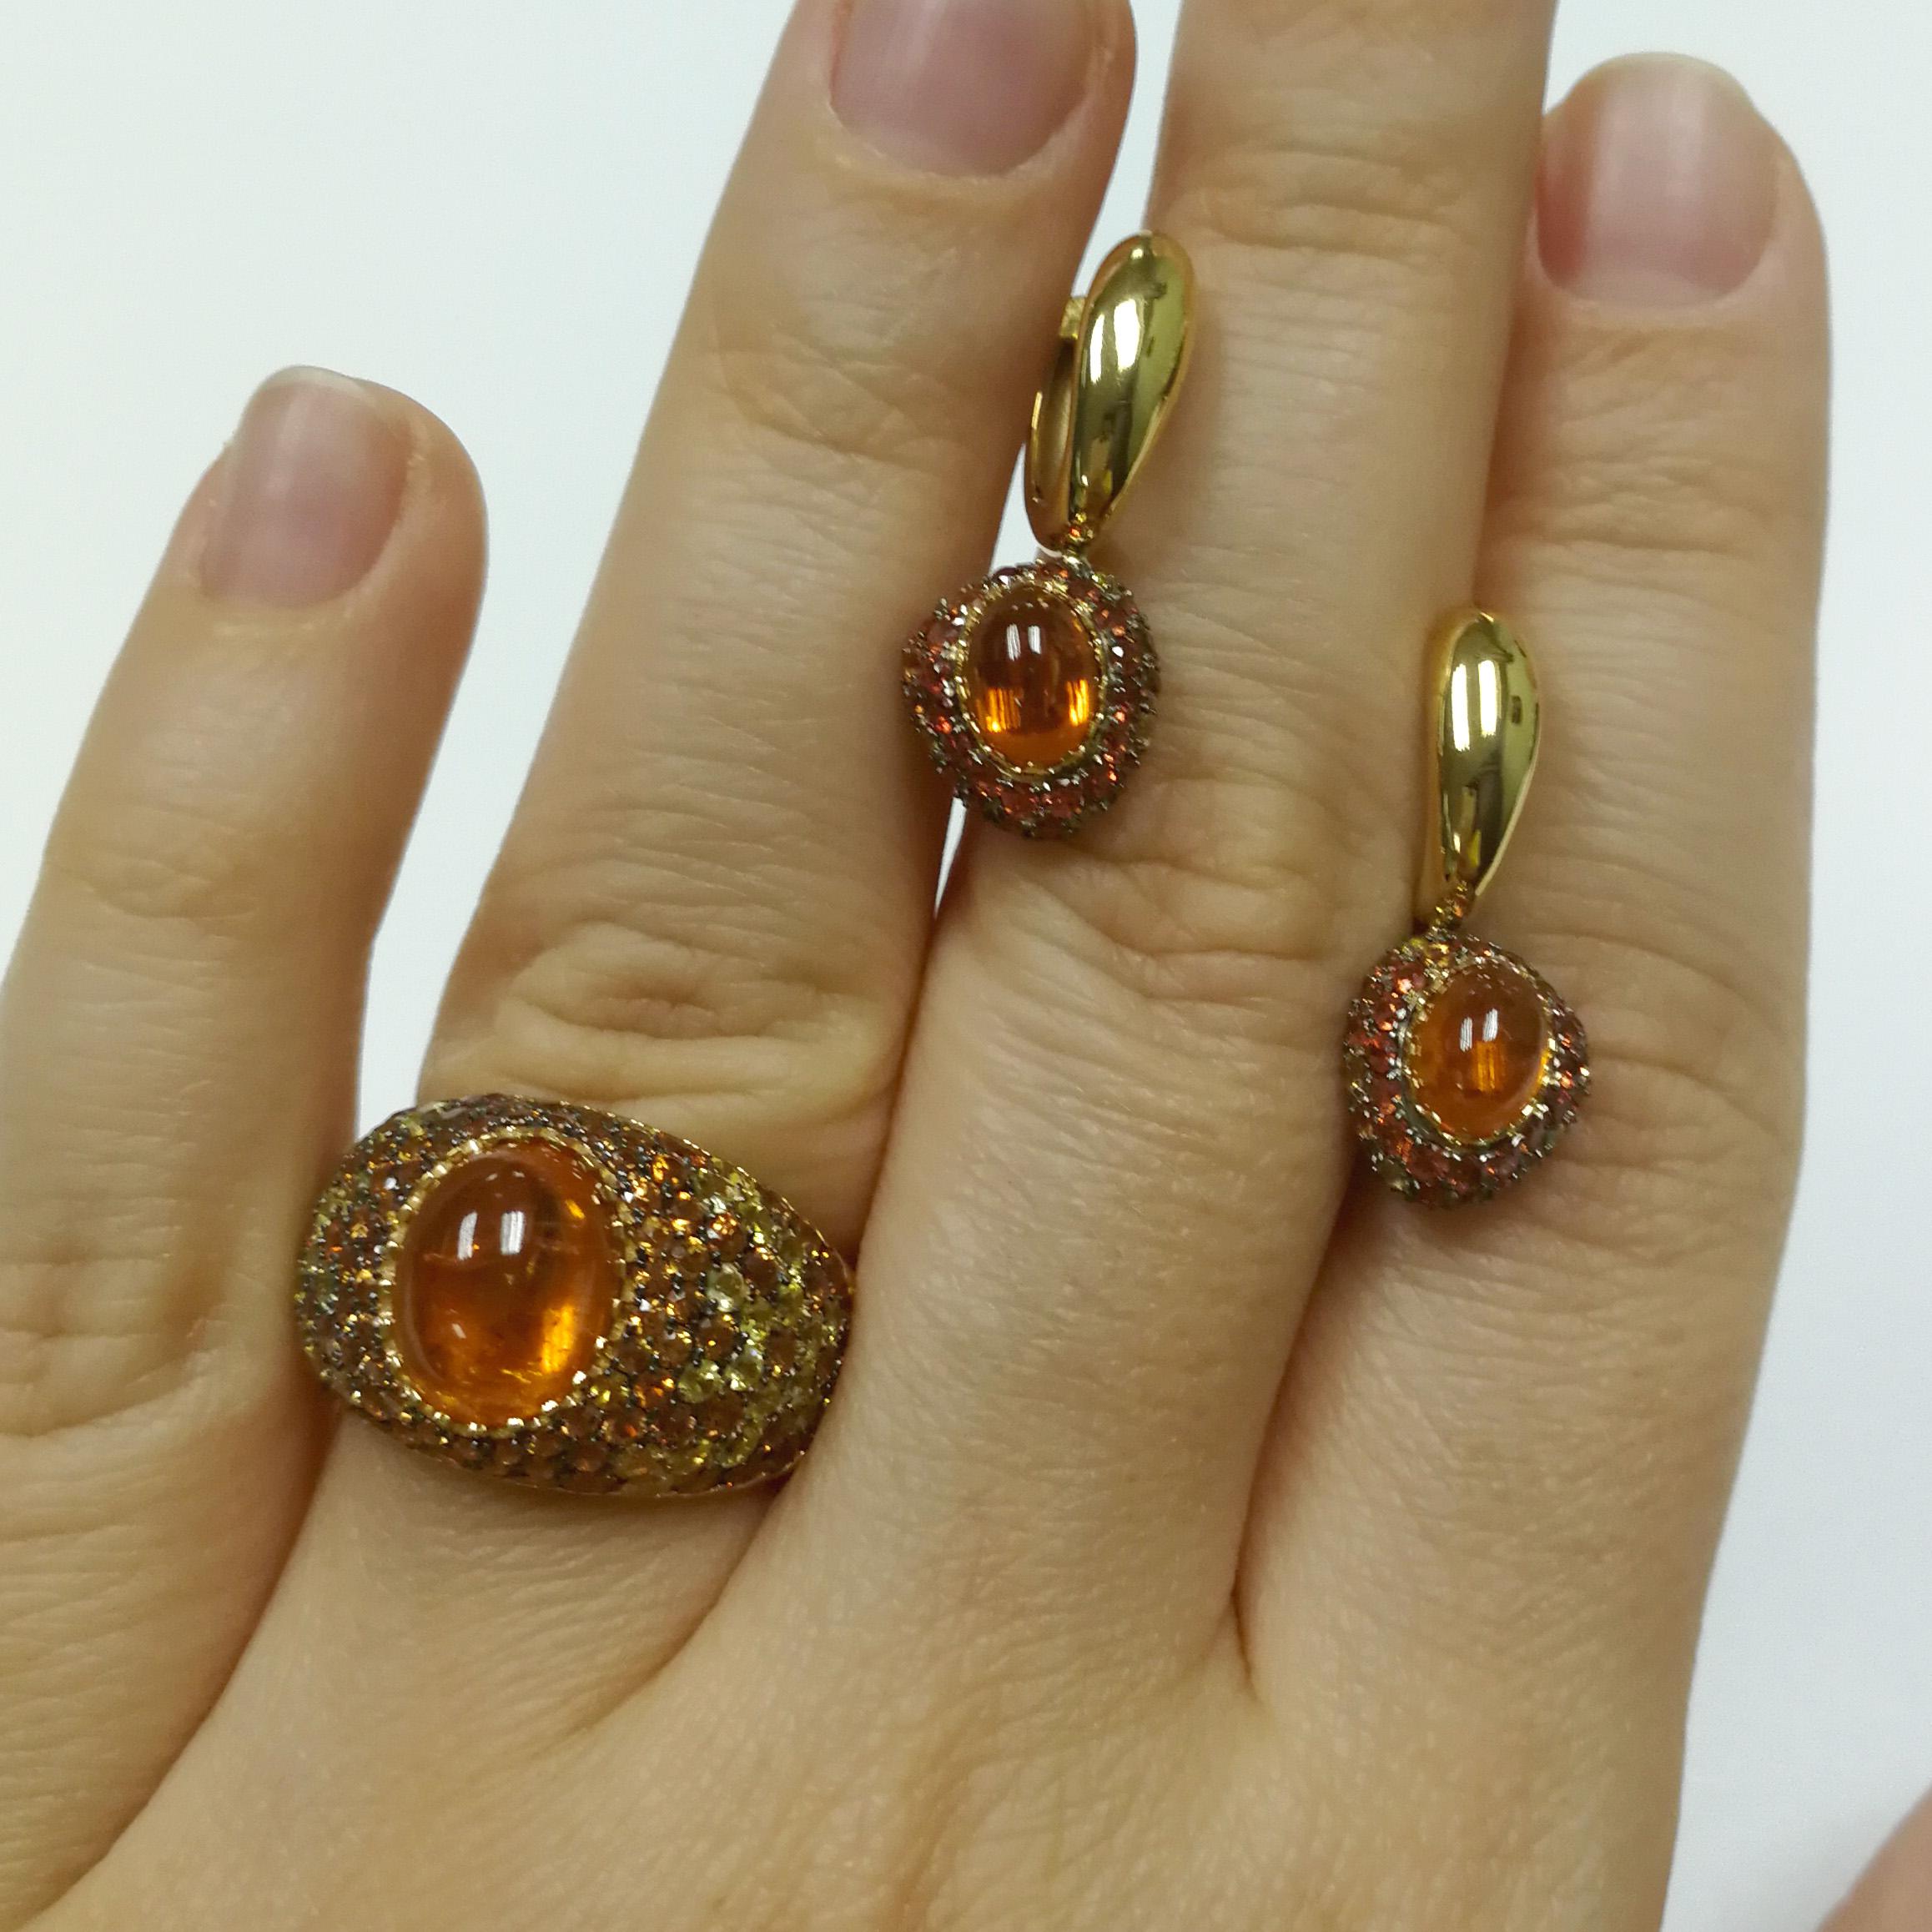 Spessartine Yellow Orange Sapphires Yellow 18 Karat Gold Riviera Suite
The name and the variety of colours in this collection are associated with the bright Italian and French Riviera, vivid and colourful houses and sun reflections on the water. A